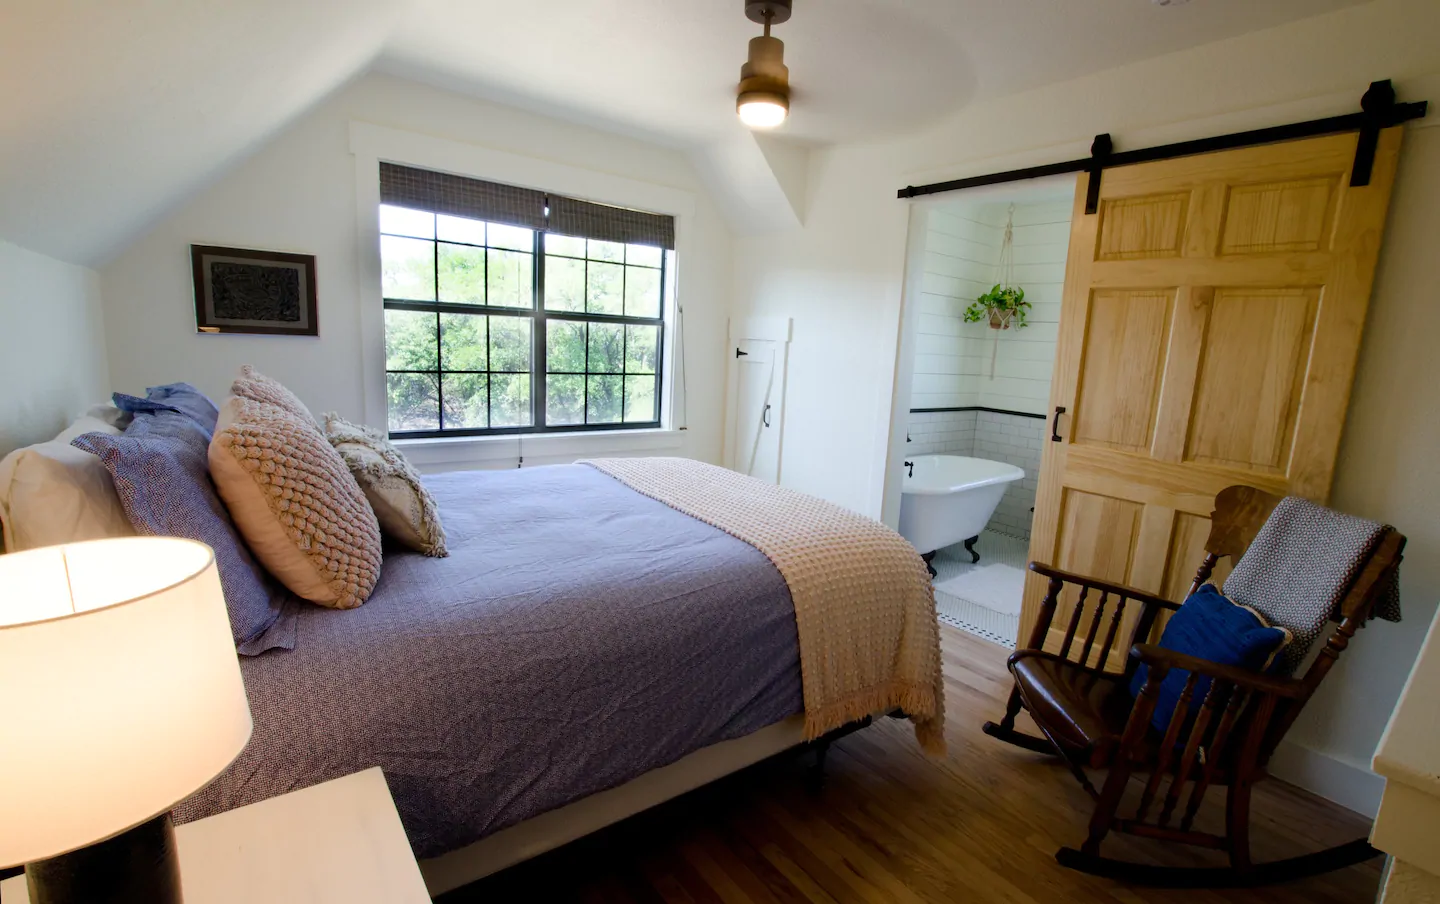 A beautiful master bedroom and bathroom, with natural lighting, a gorgeous sliding barn door, and a claw foot tub.  Lovely cabin getaway in Texas!